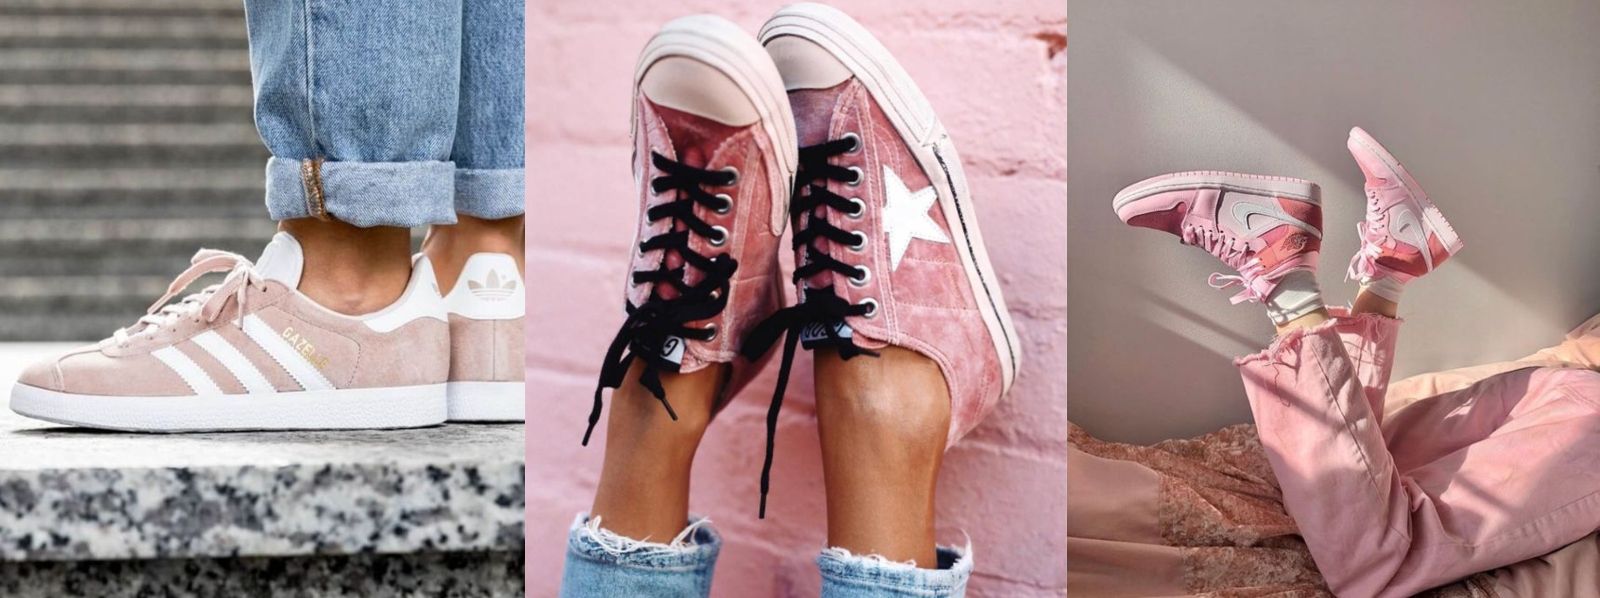 images easyblog articles 11271 pink sneakers outfit 86201e17